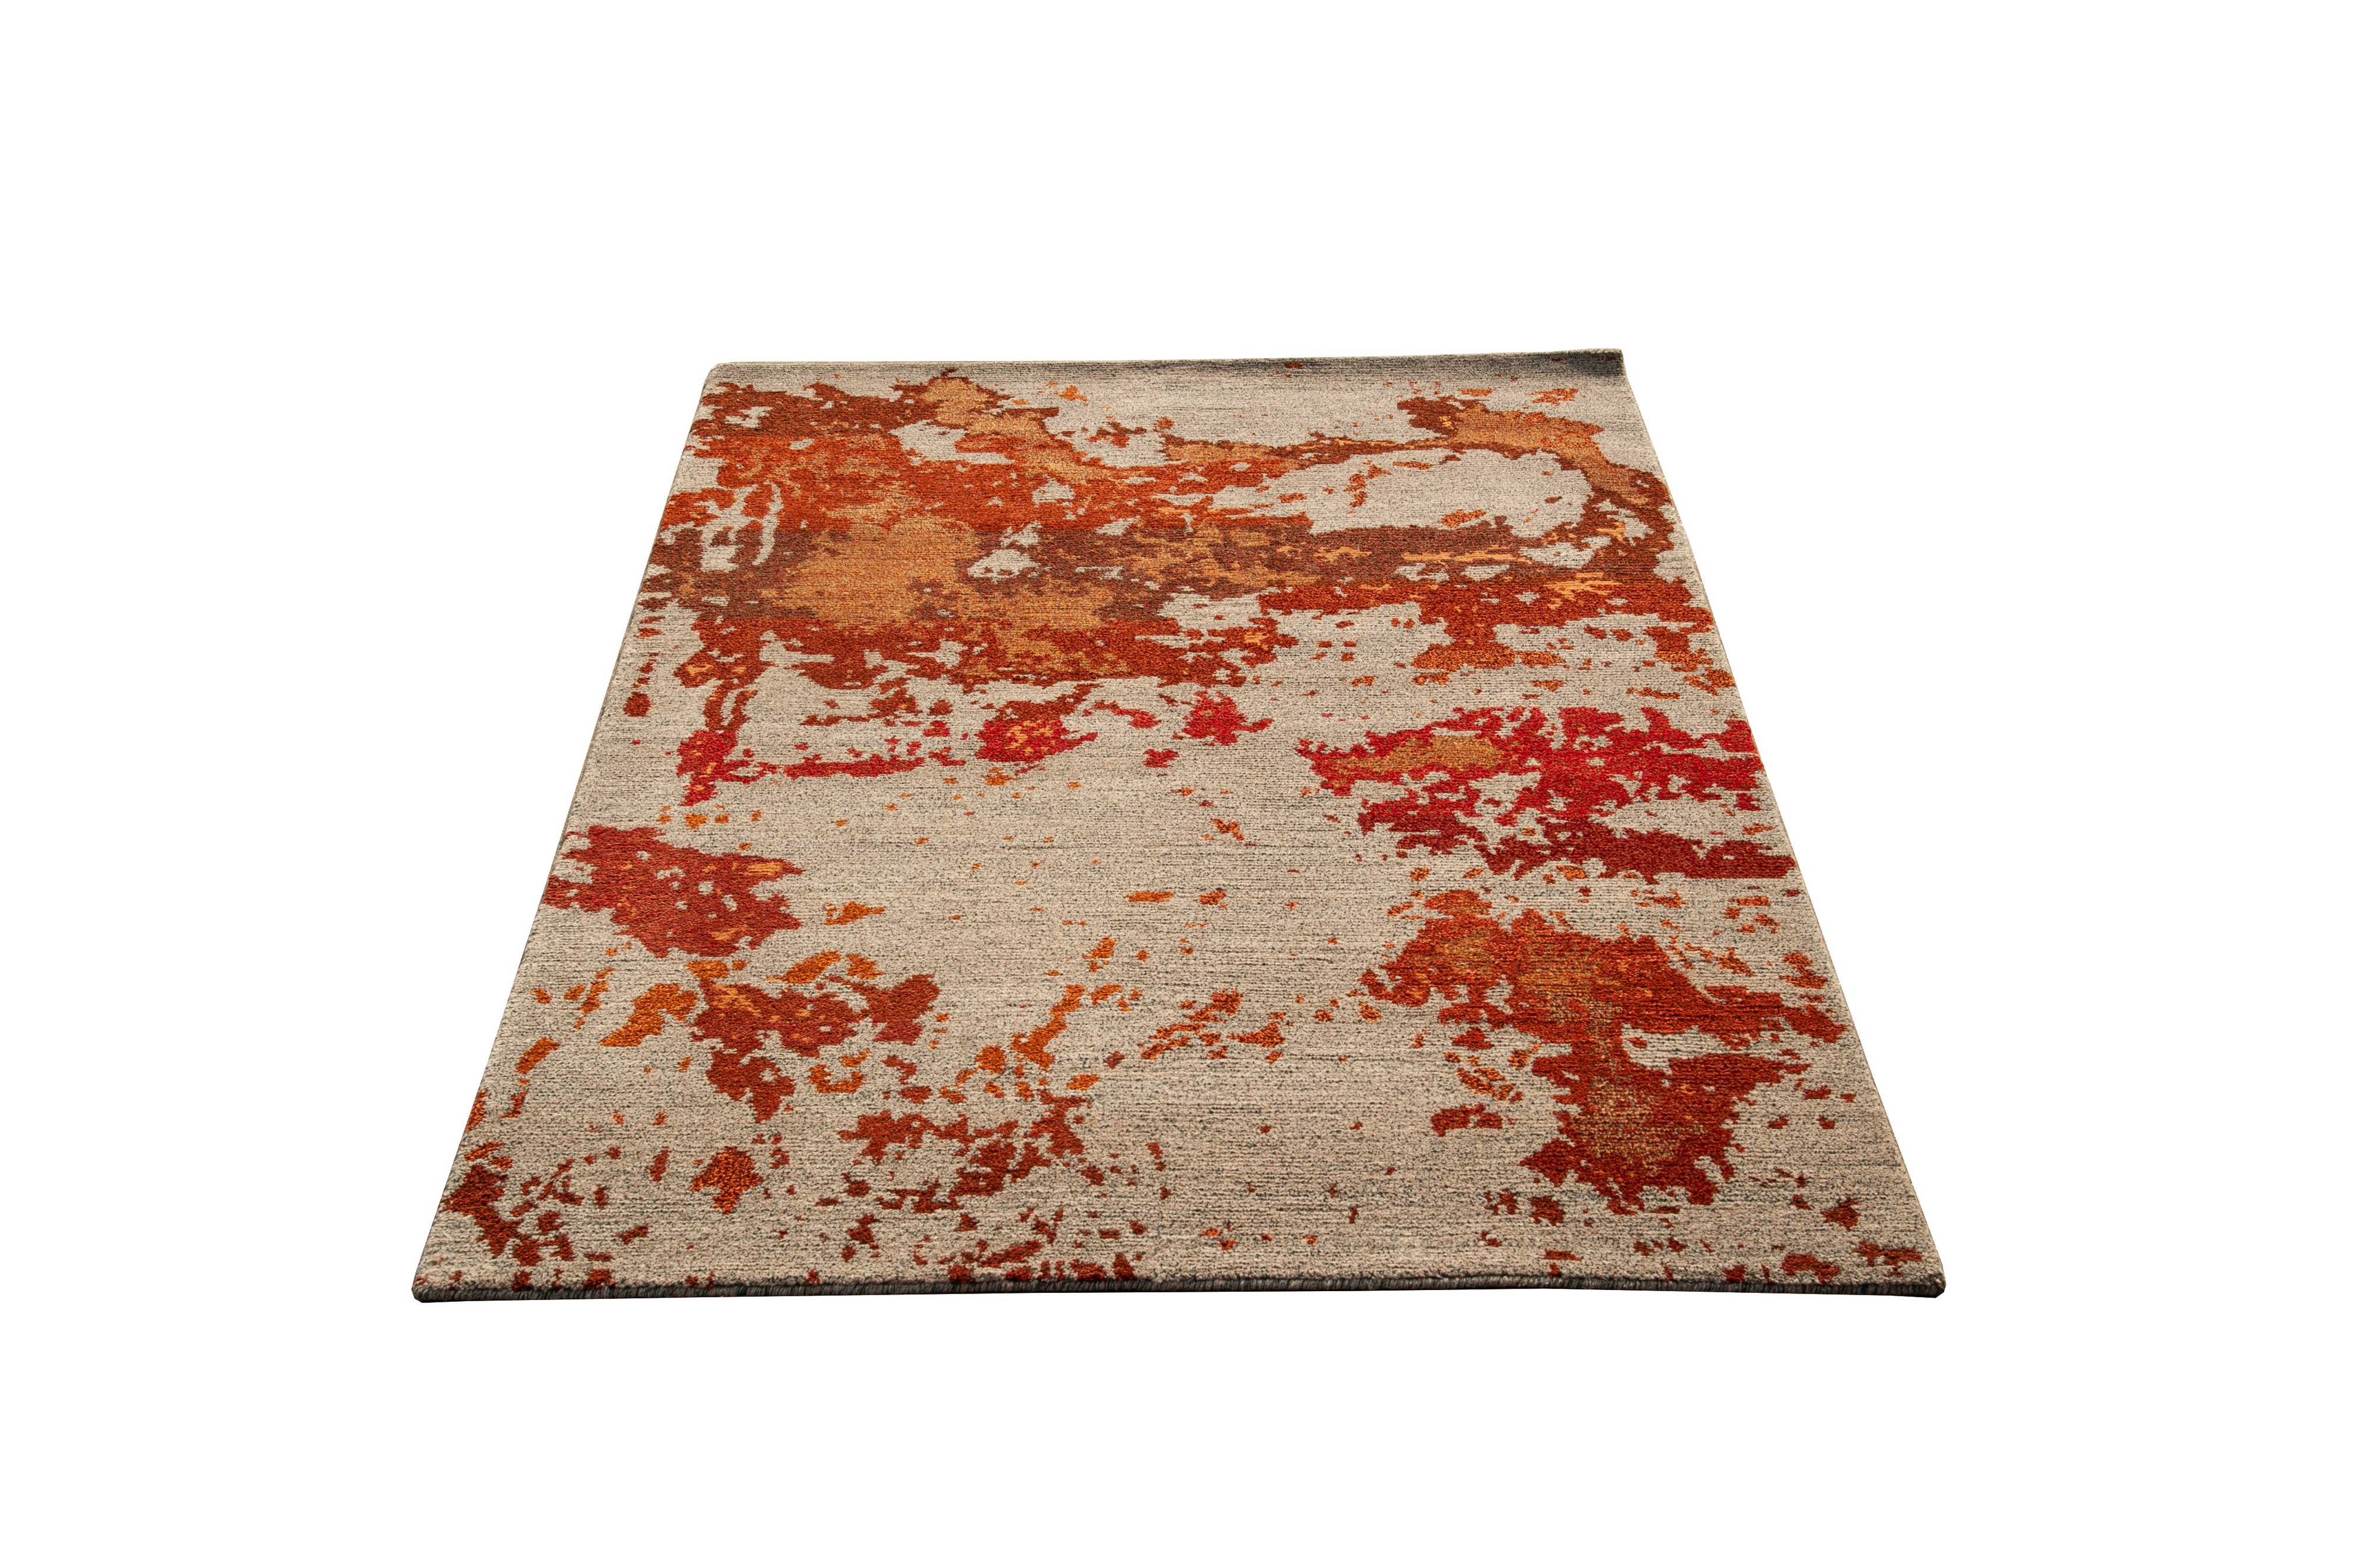 Nepali Handmade Woolen Abstract Carpet, 60 Knots, Red And Orange